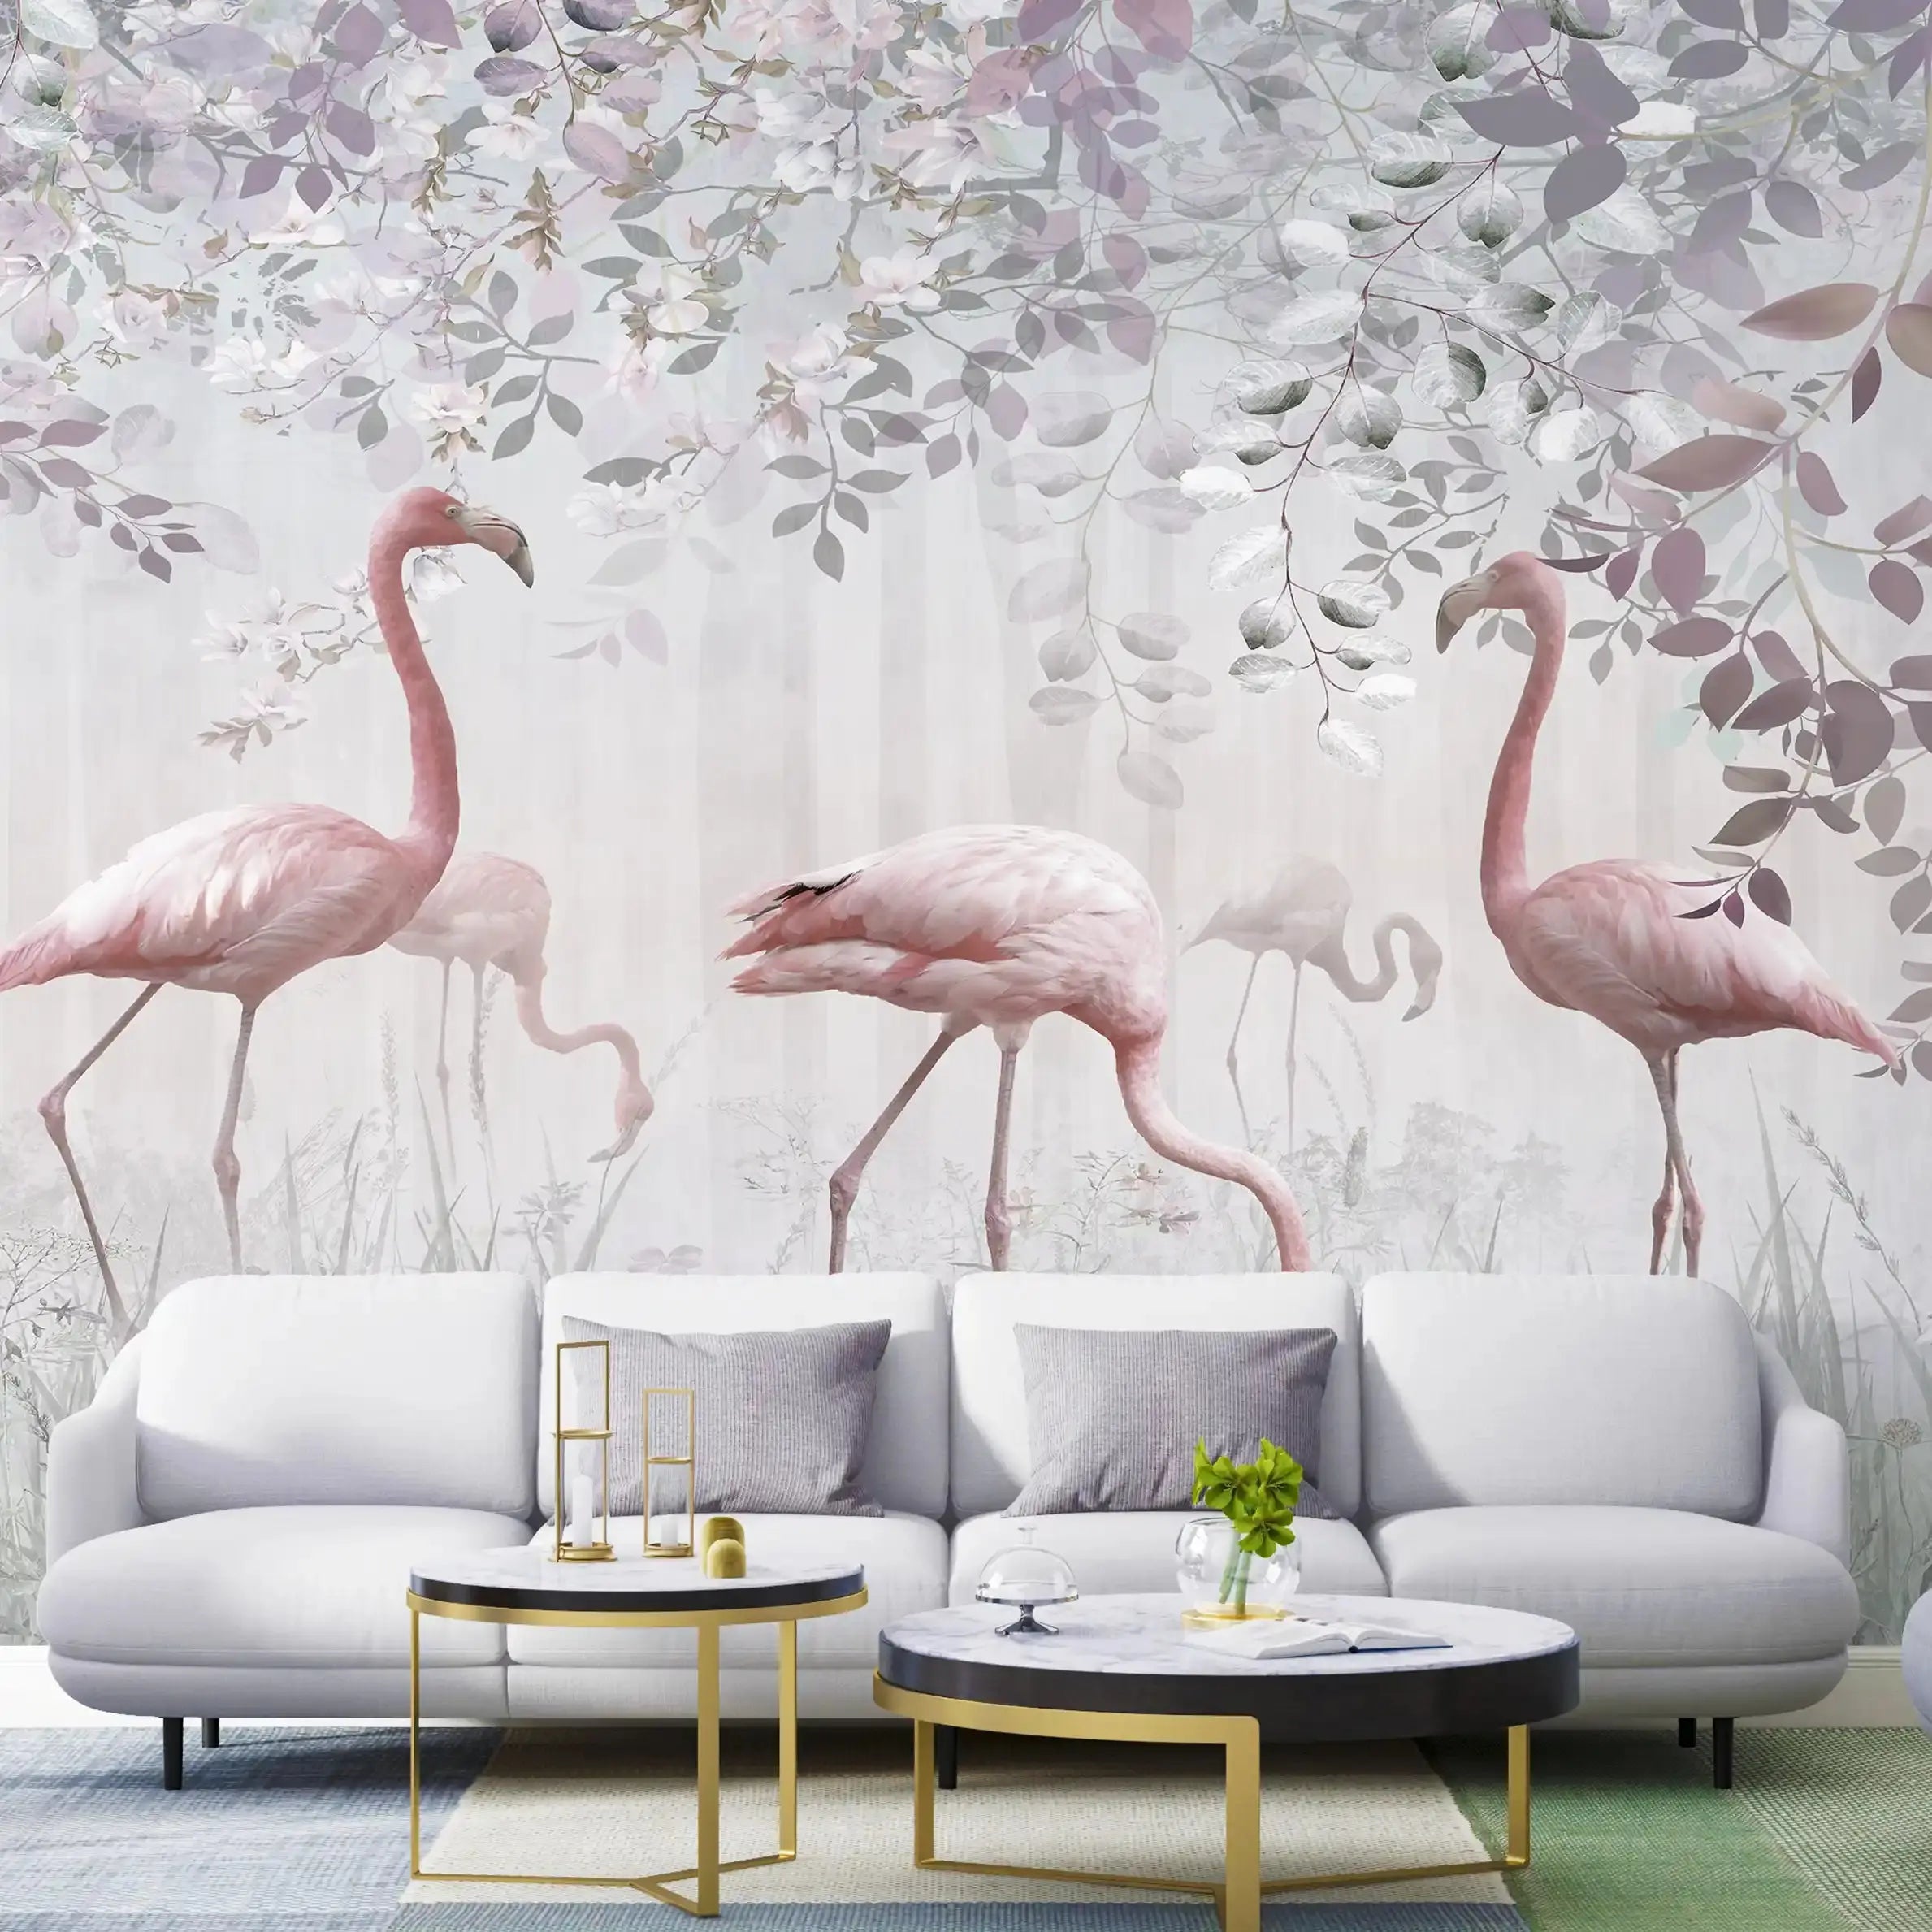 3054-B / Peel and Stick Wallpaper with Pink FlamingoBoho WallPaper for Wall Decor, Easy Install, Removable for Nursery, Bathroom, Bedroom - Artevella